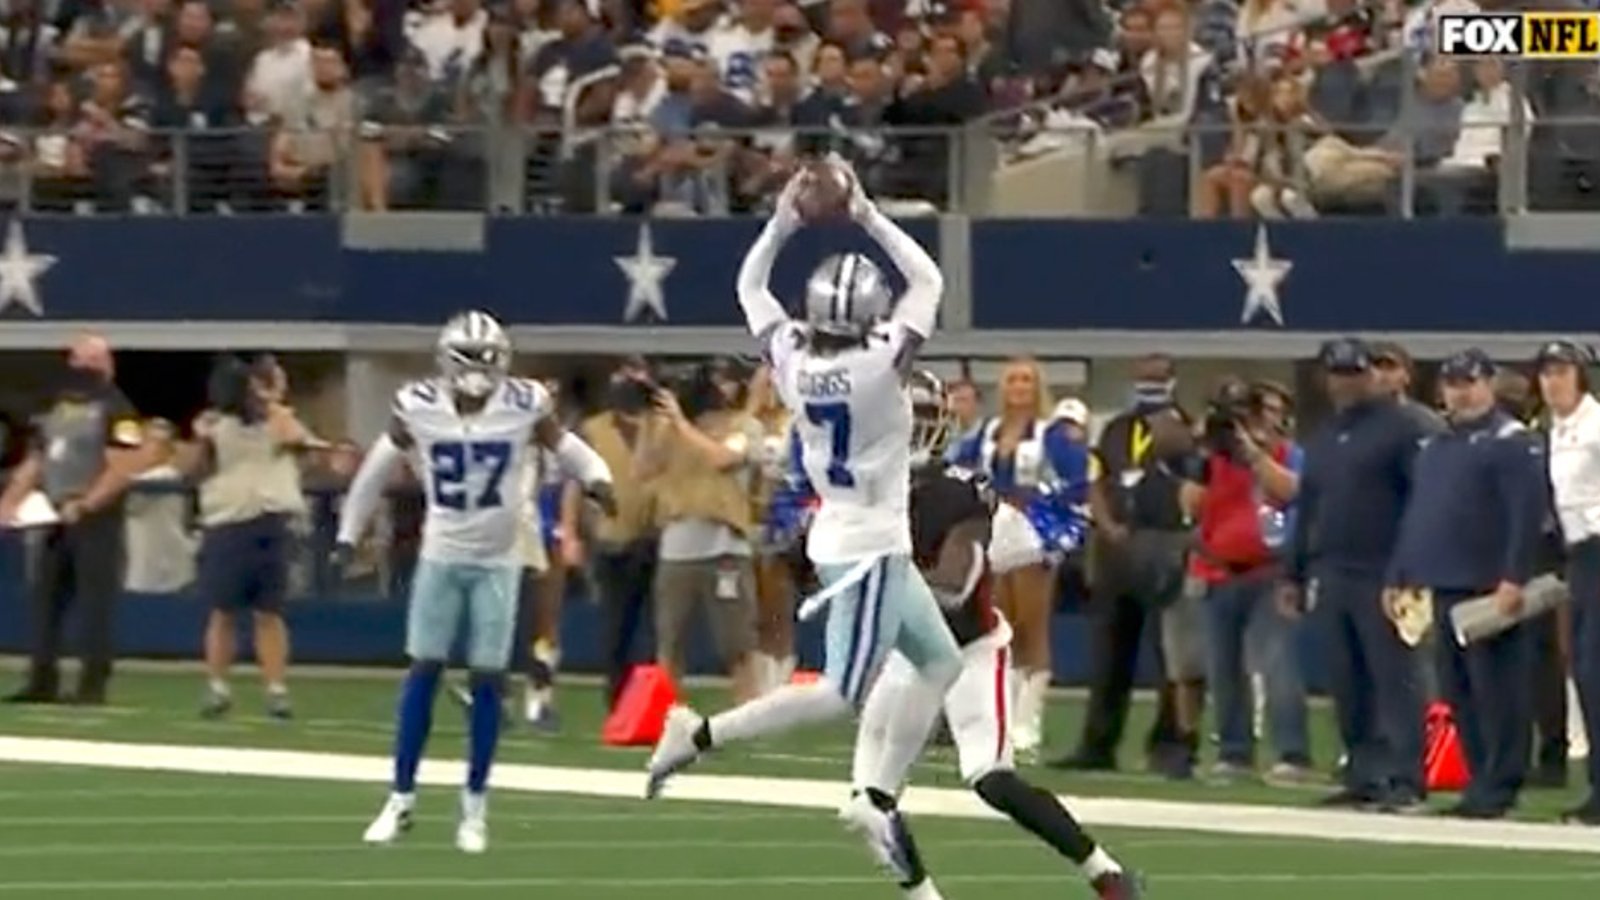 NFL leader Trevon Diggs does it AGAIN for Cowboys! 